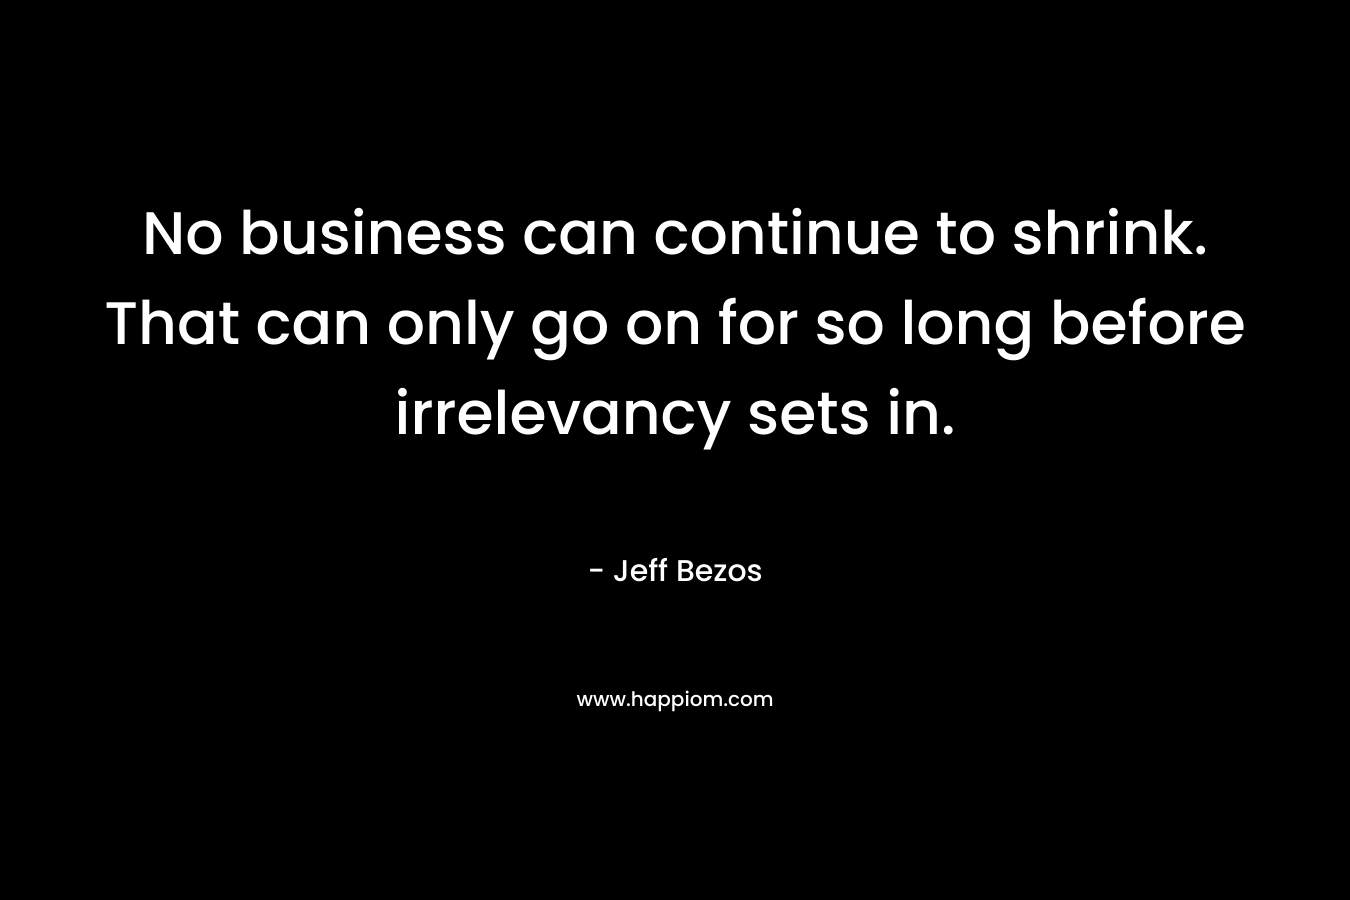 No business can continue to shrink. That can only go on for so long before irrelevancy sets in. – Jeff Bezos